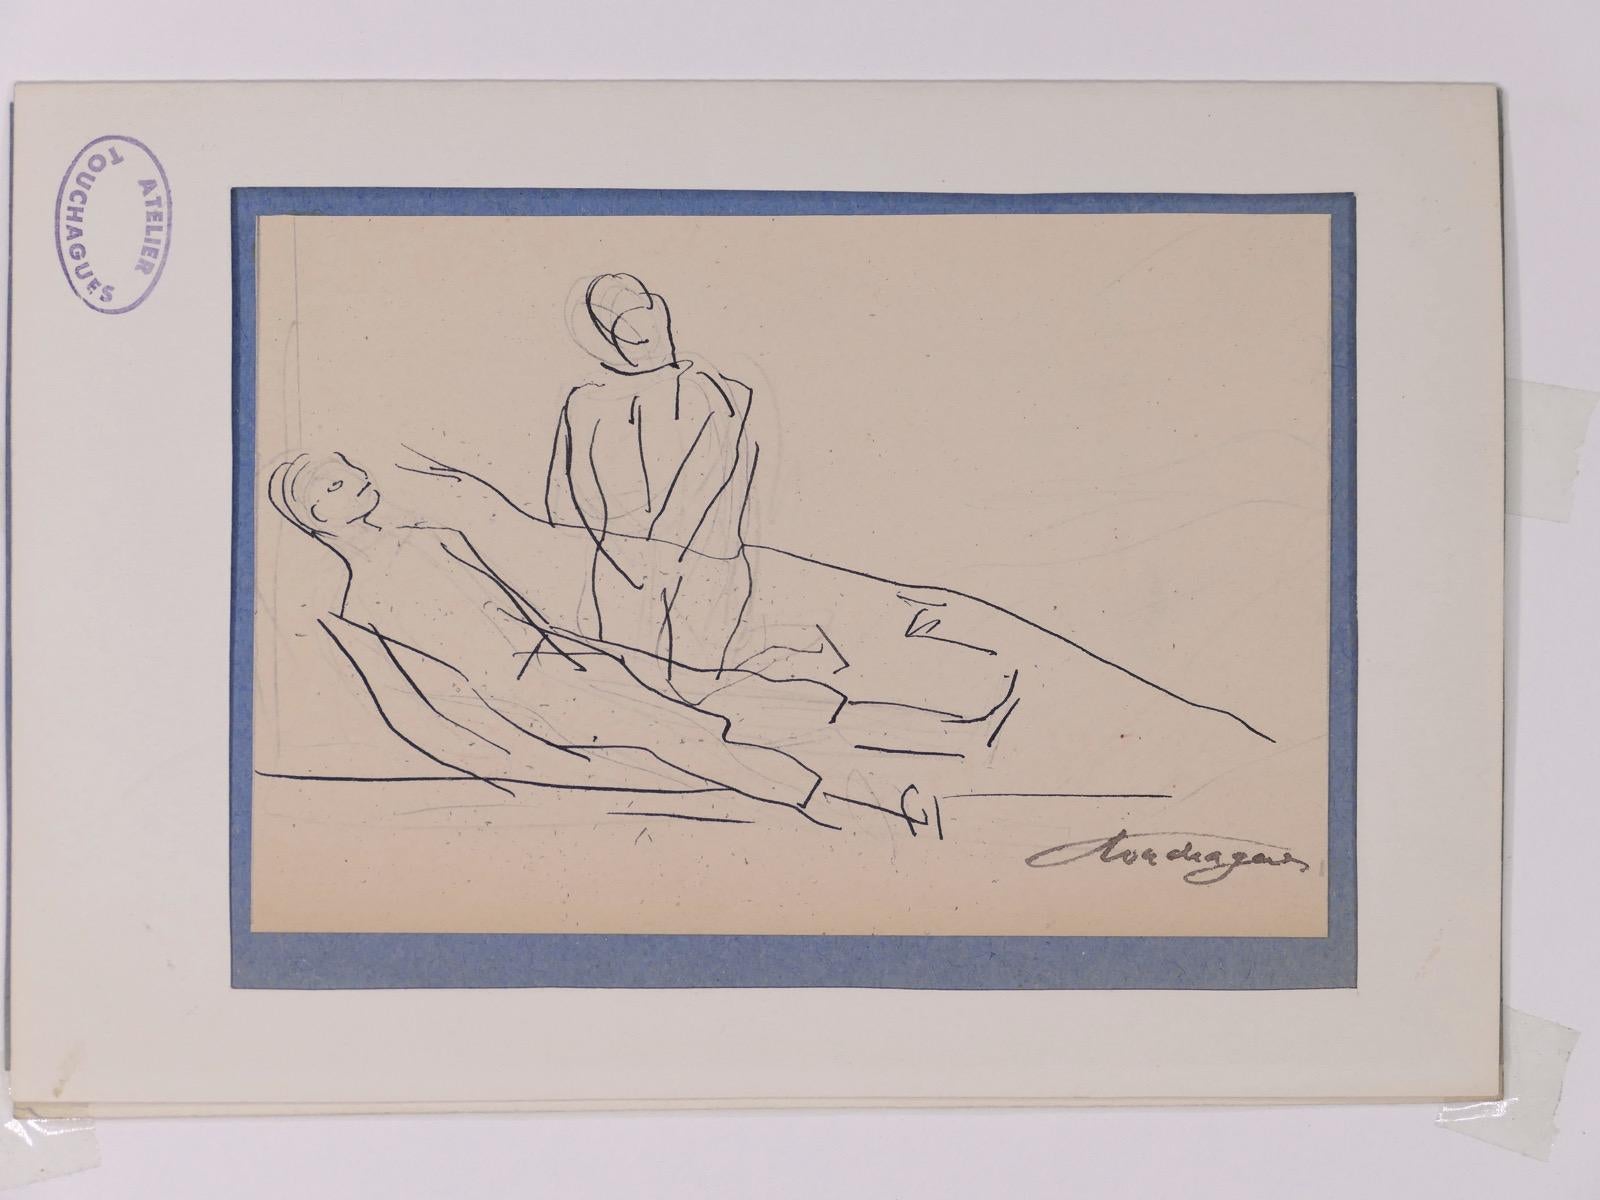 Louis Touchagues Figurative Art - Man Lying and Standing - Original Ink by L. Touchagues - Early 20th Century